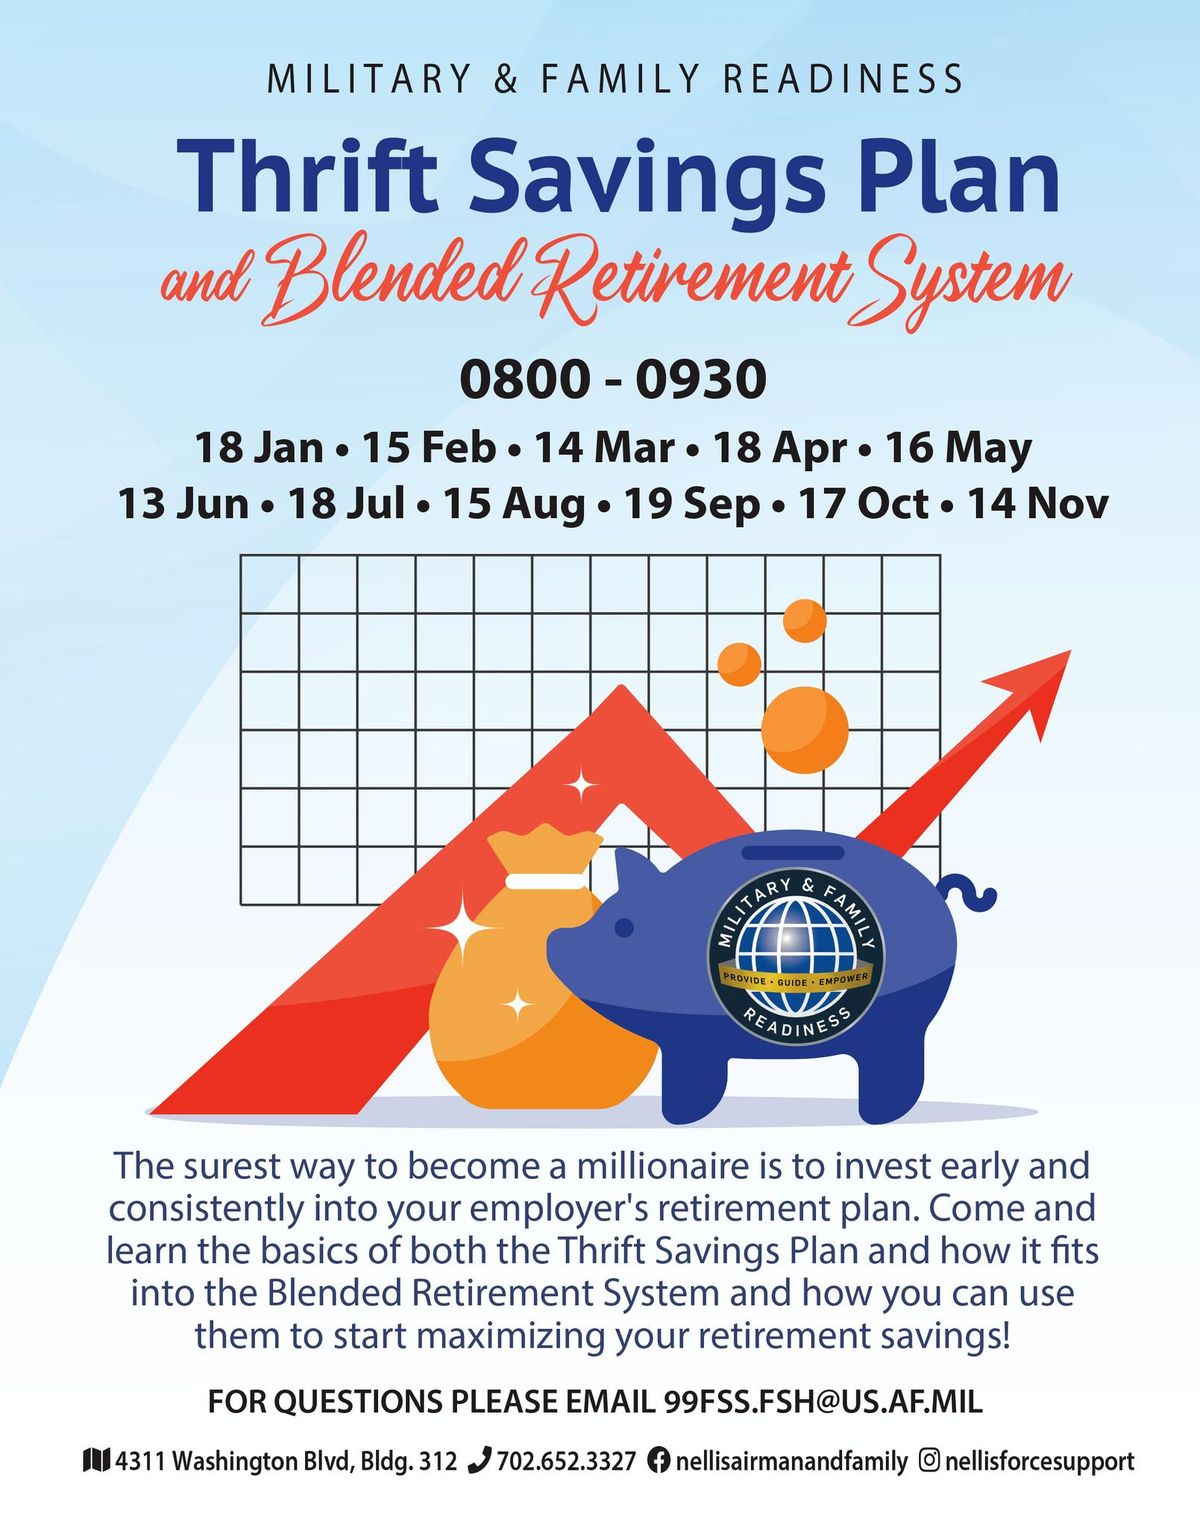 Thrifts Savings Plan and Blended Retirement System